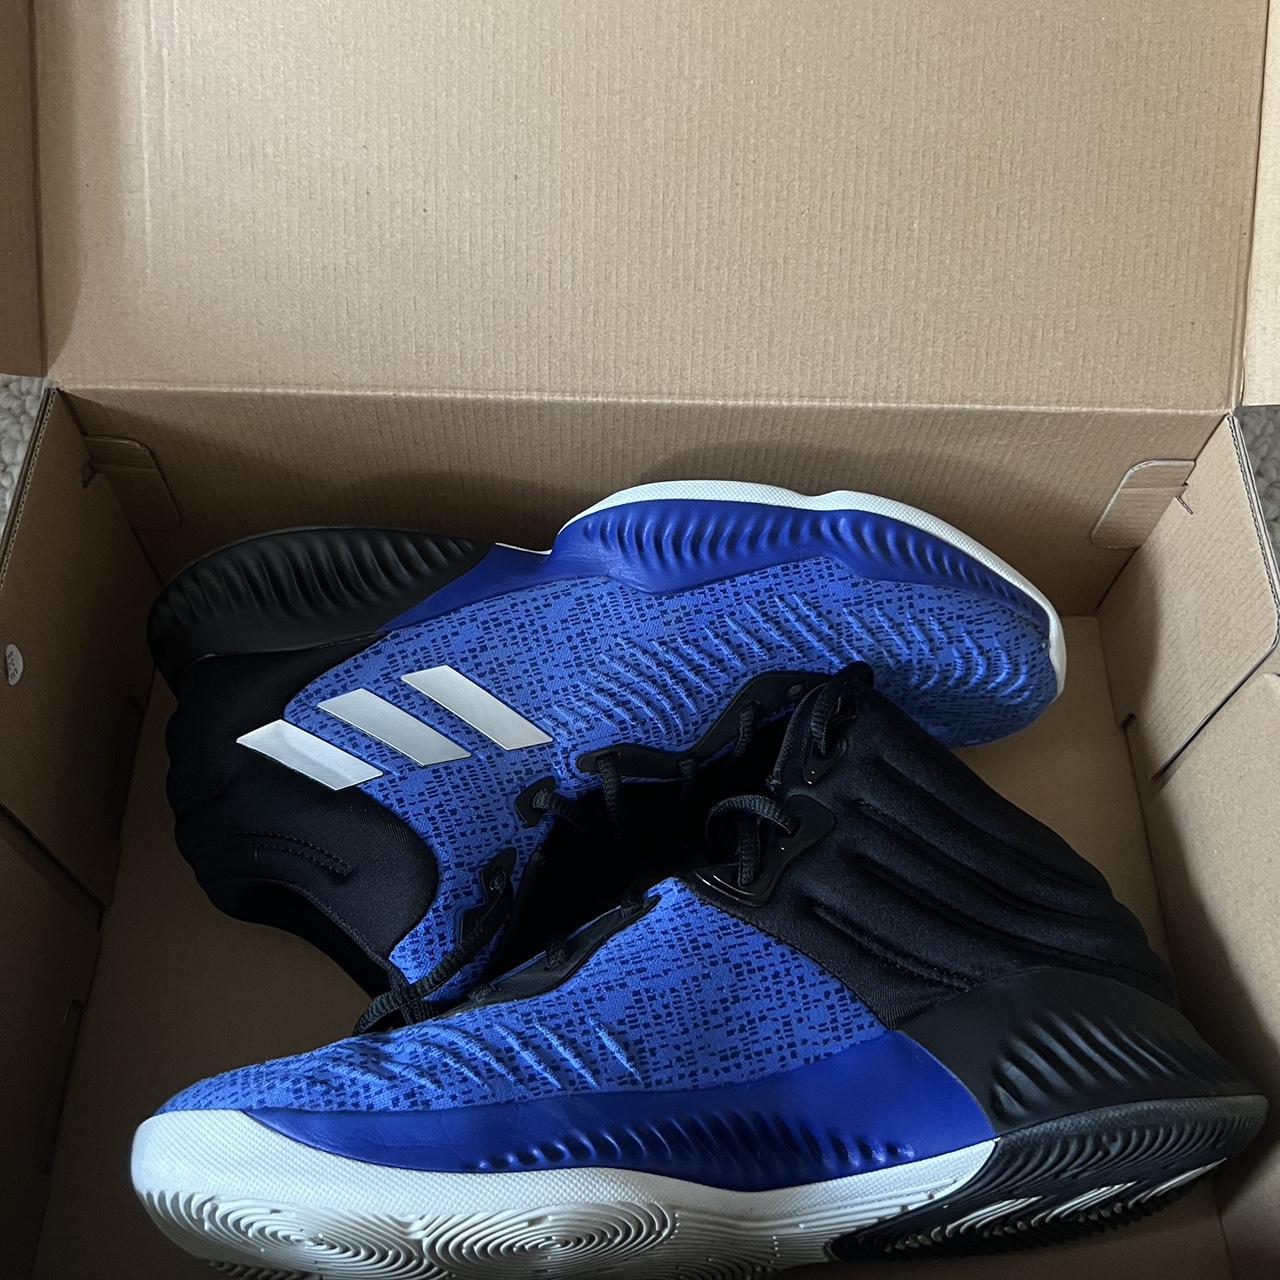 Blue Adidas Mad Bounce 2018 - Size M11. Very good... - Depop